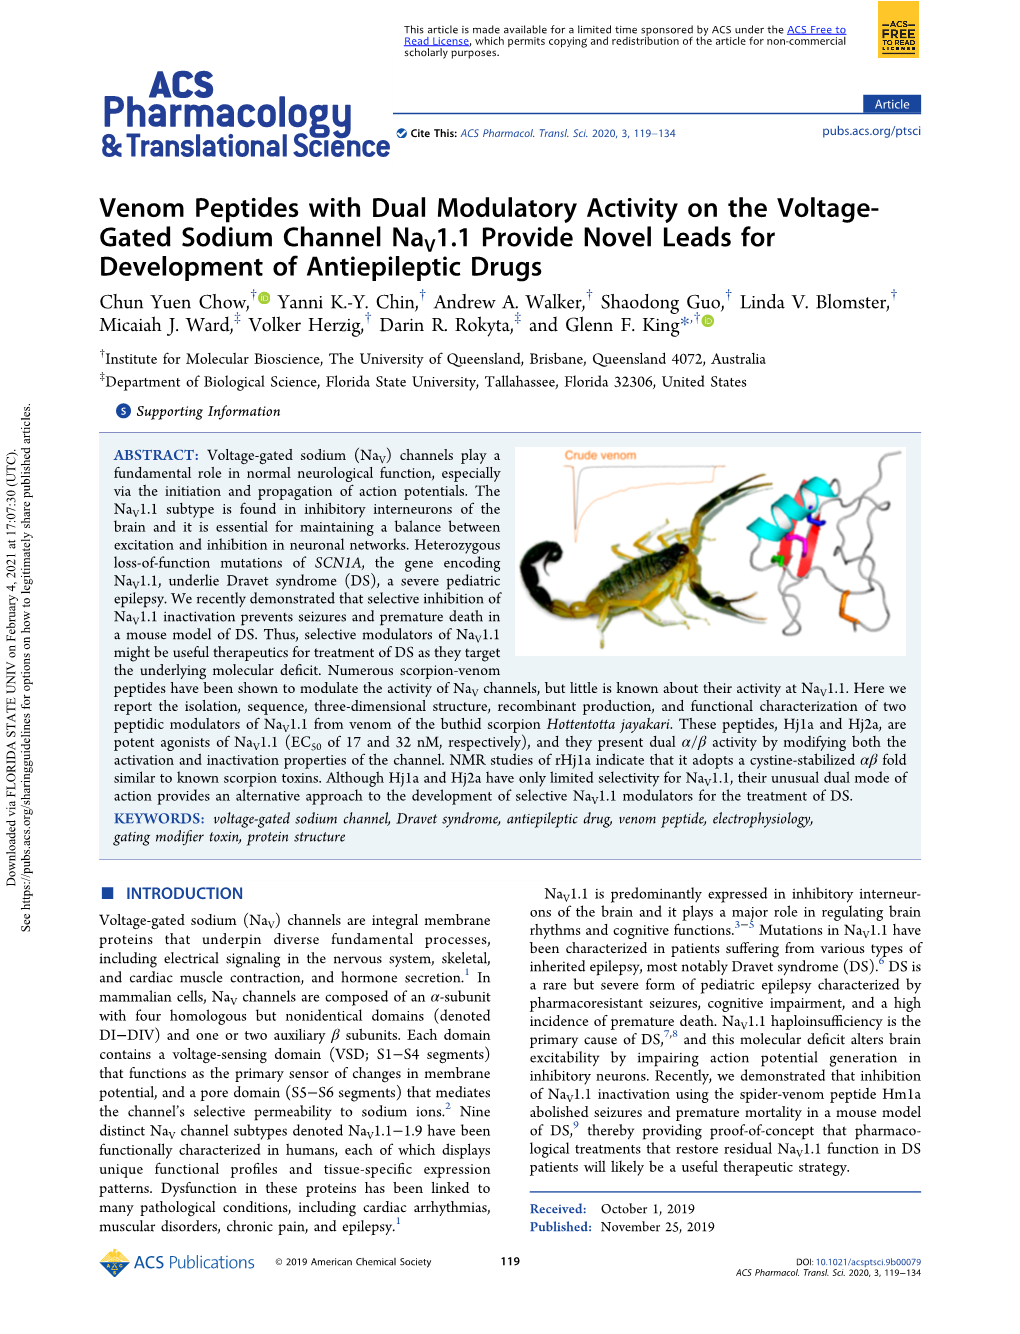 Venom Peptides with Dual Modulatory Activity on the Voltage-Gated